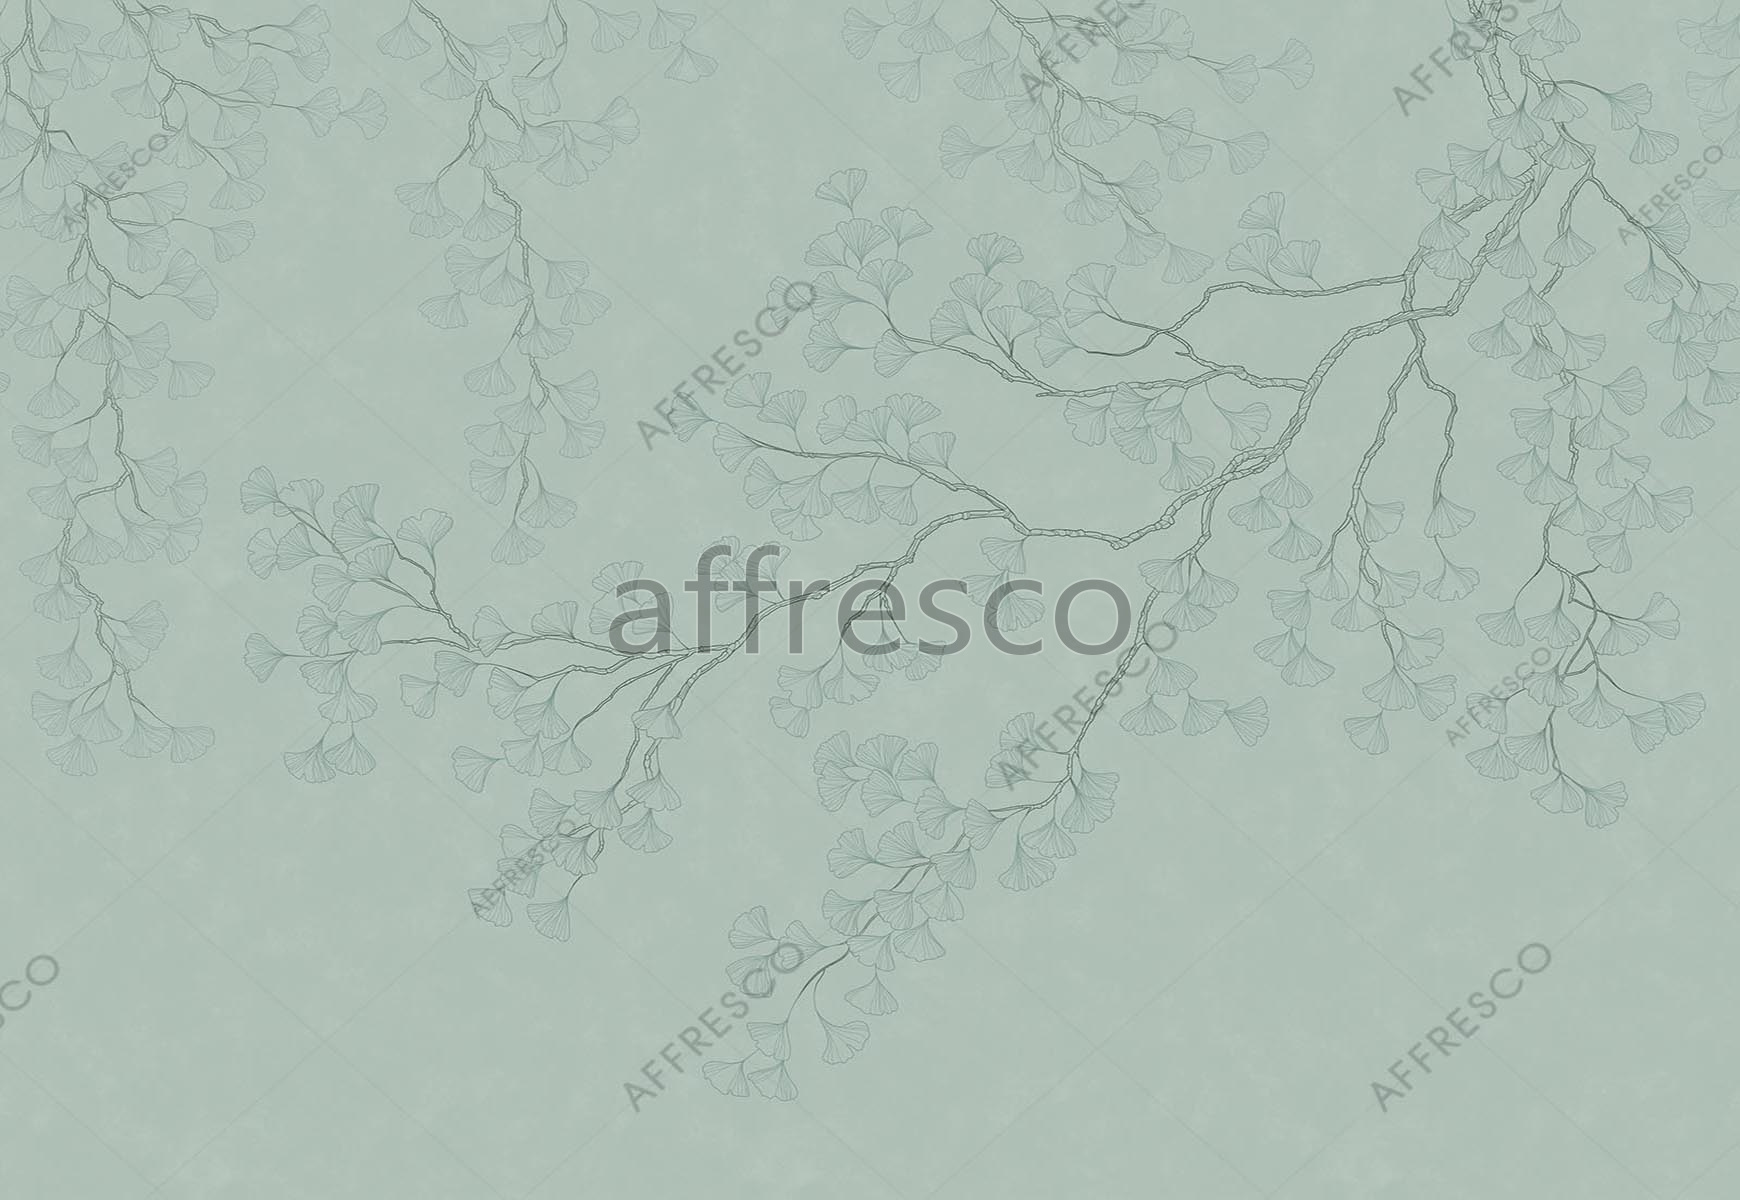 ID139154 | Forest | Branches in the wind | Affresco Factory